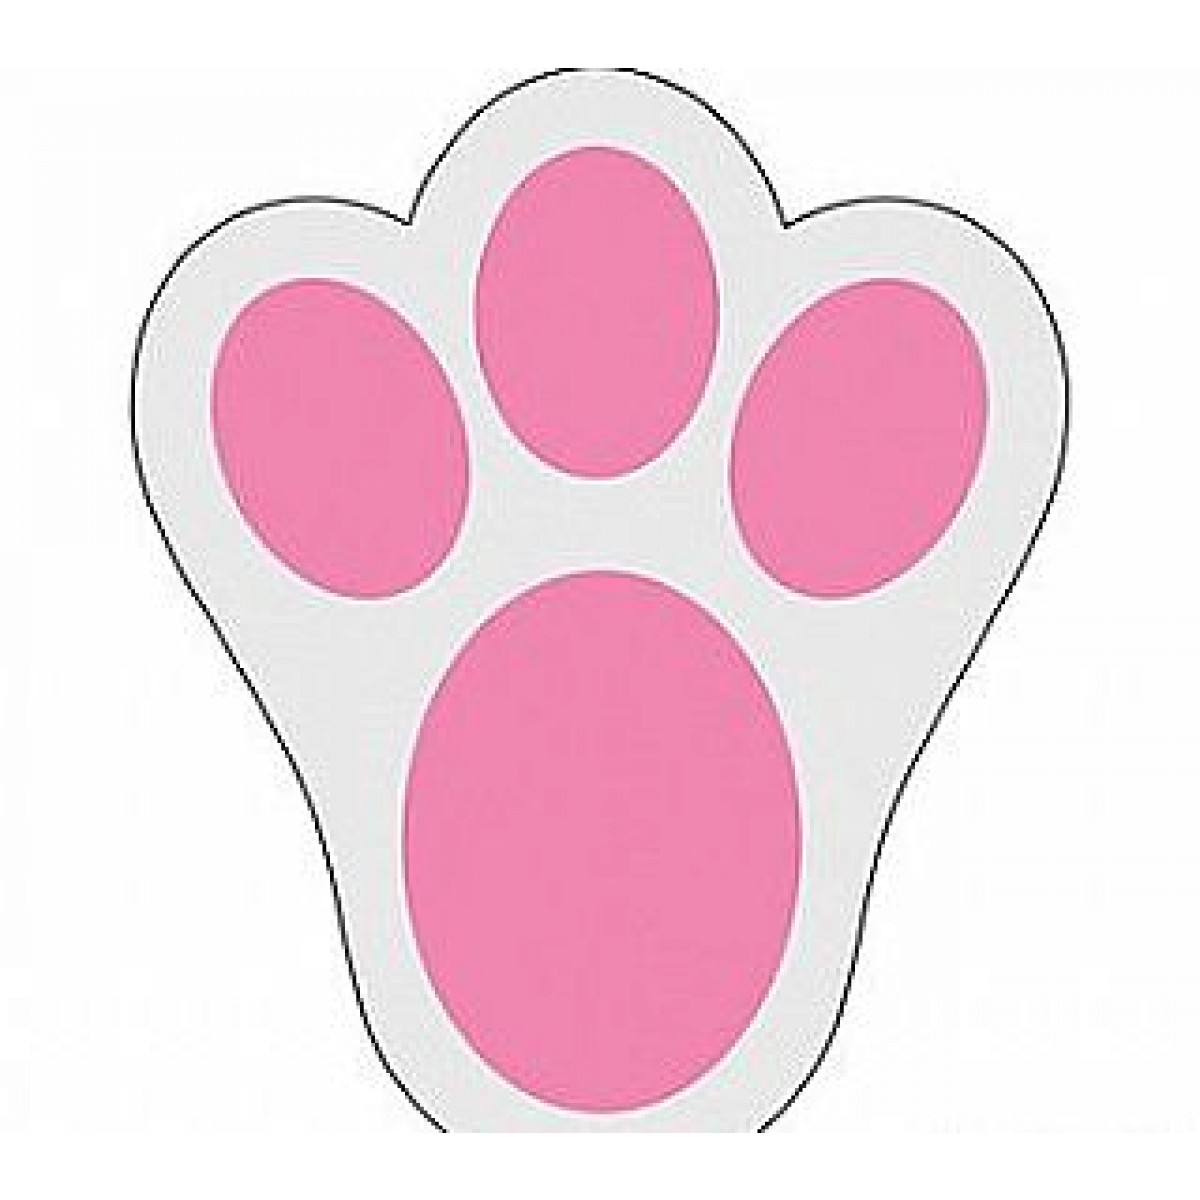  Free Printable Easter Bunny Paw Prints Template Front And Back Paws stencil footprint trail 